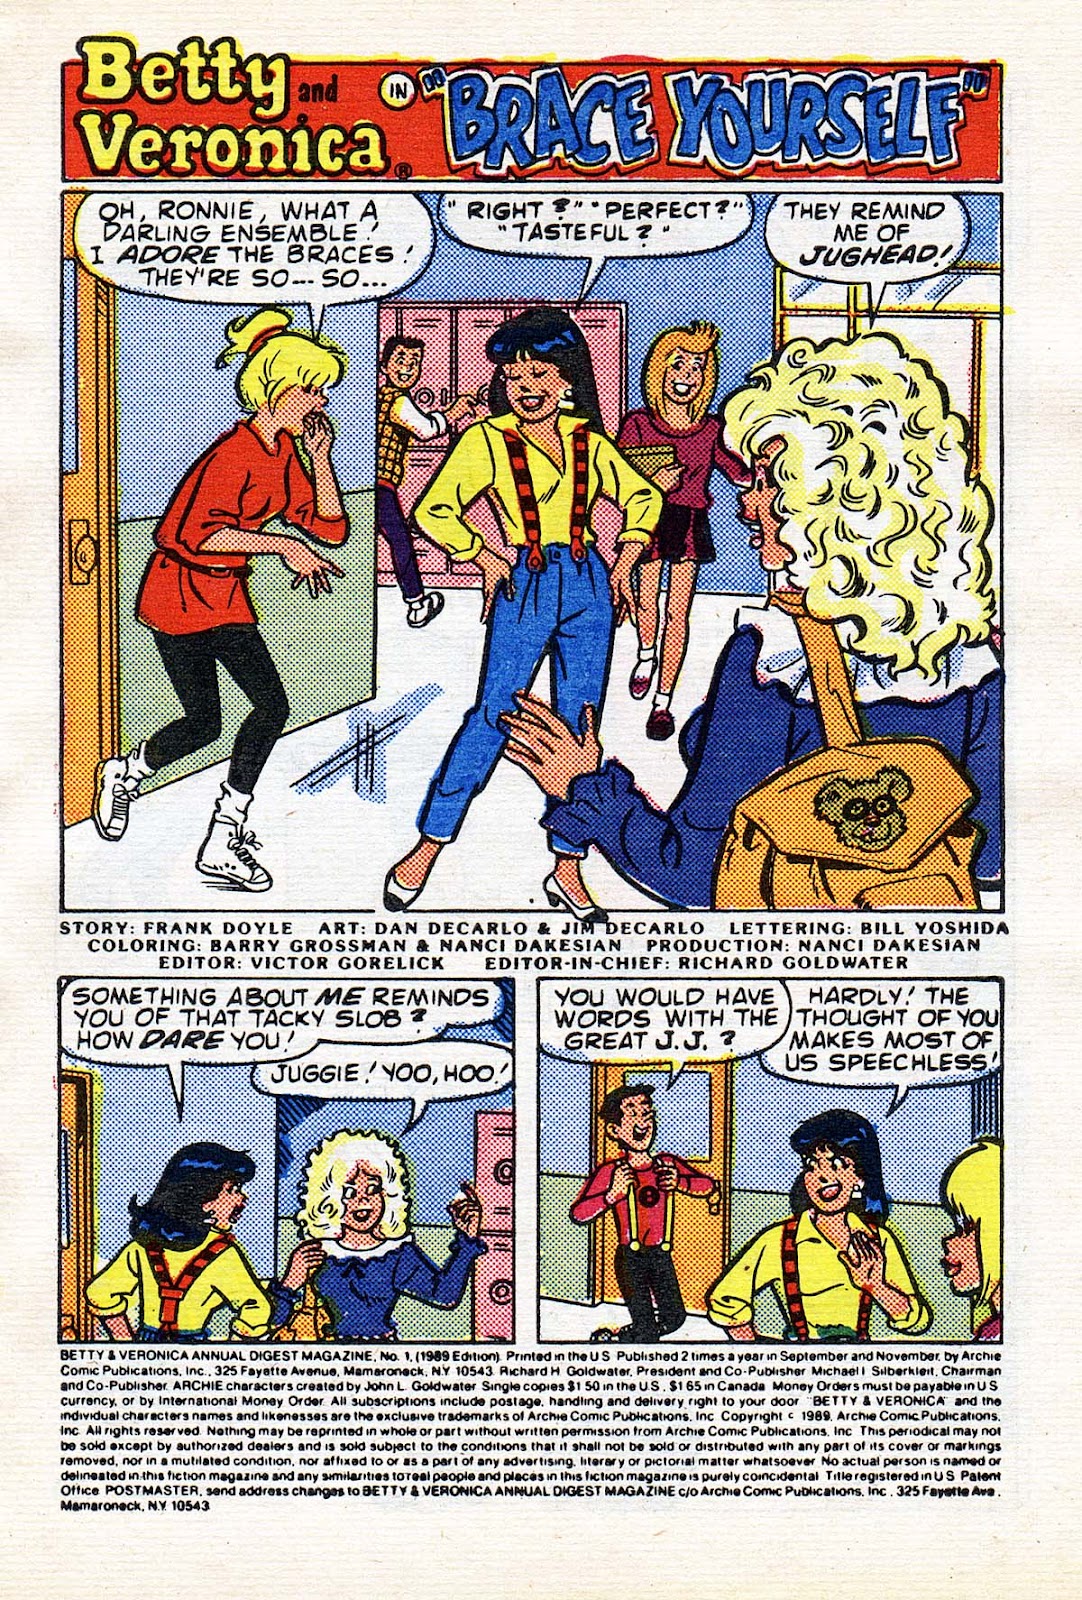 Betty and Veronica Annual Digest Magazine issue 1 - Page 2